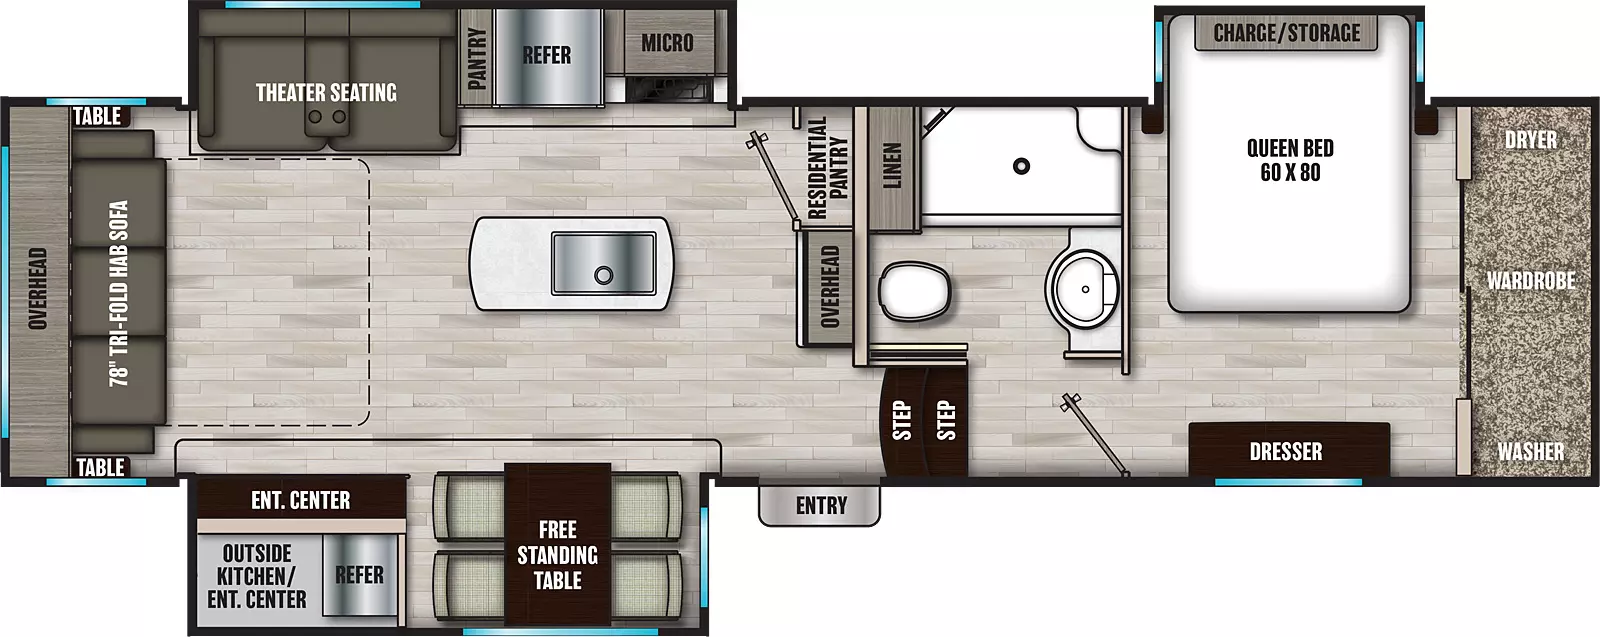 The 298RLS has three slideouts and one entry. Exterior features include an outside kitchen with entertainment center. Interior layout front to back: front bedroom with off-door side queen bed slide out, front wardrobe with washer and dryer, and door side dresser; off-door side full bathroom with linen closet; two steps down to entry door and main living area; counter with overhead cabinet and residential pantry along inner wall; kitchen island with sink; off-door side slideout with microwave, refrigerator, pantry, and theater seating; door side slideout with free-standing table, and entertainment center; rear tri-fold hide-a-bed sofa with overhead cabinet and tables on each side.